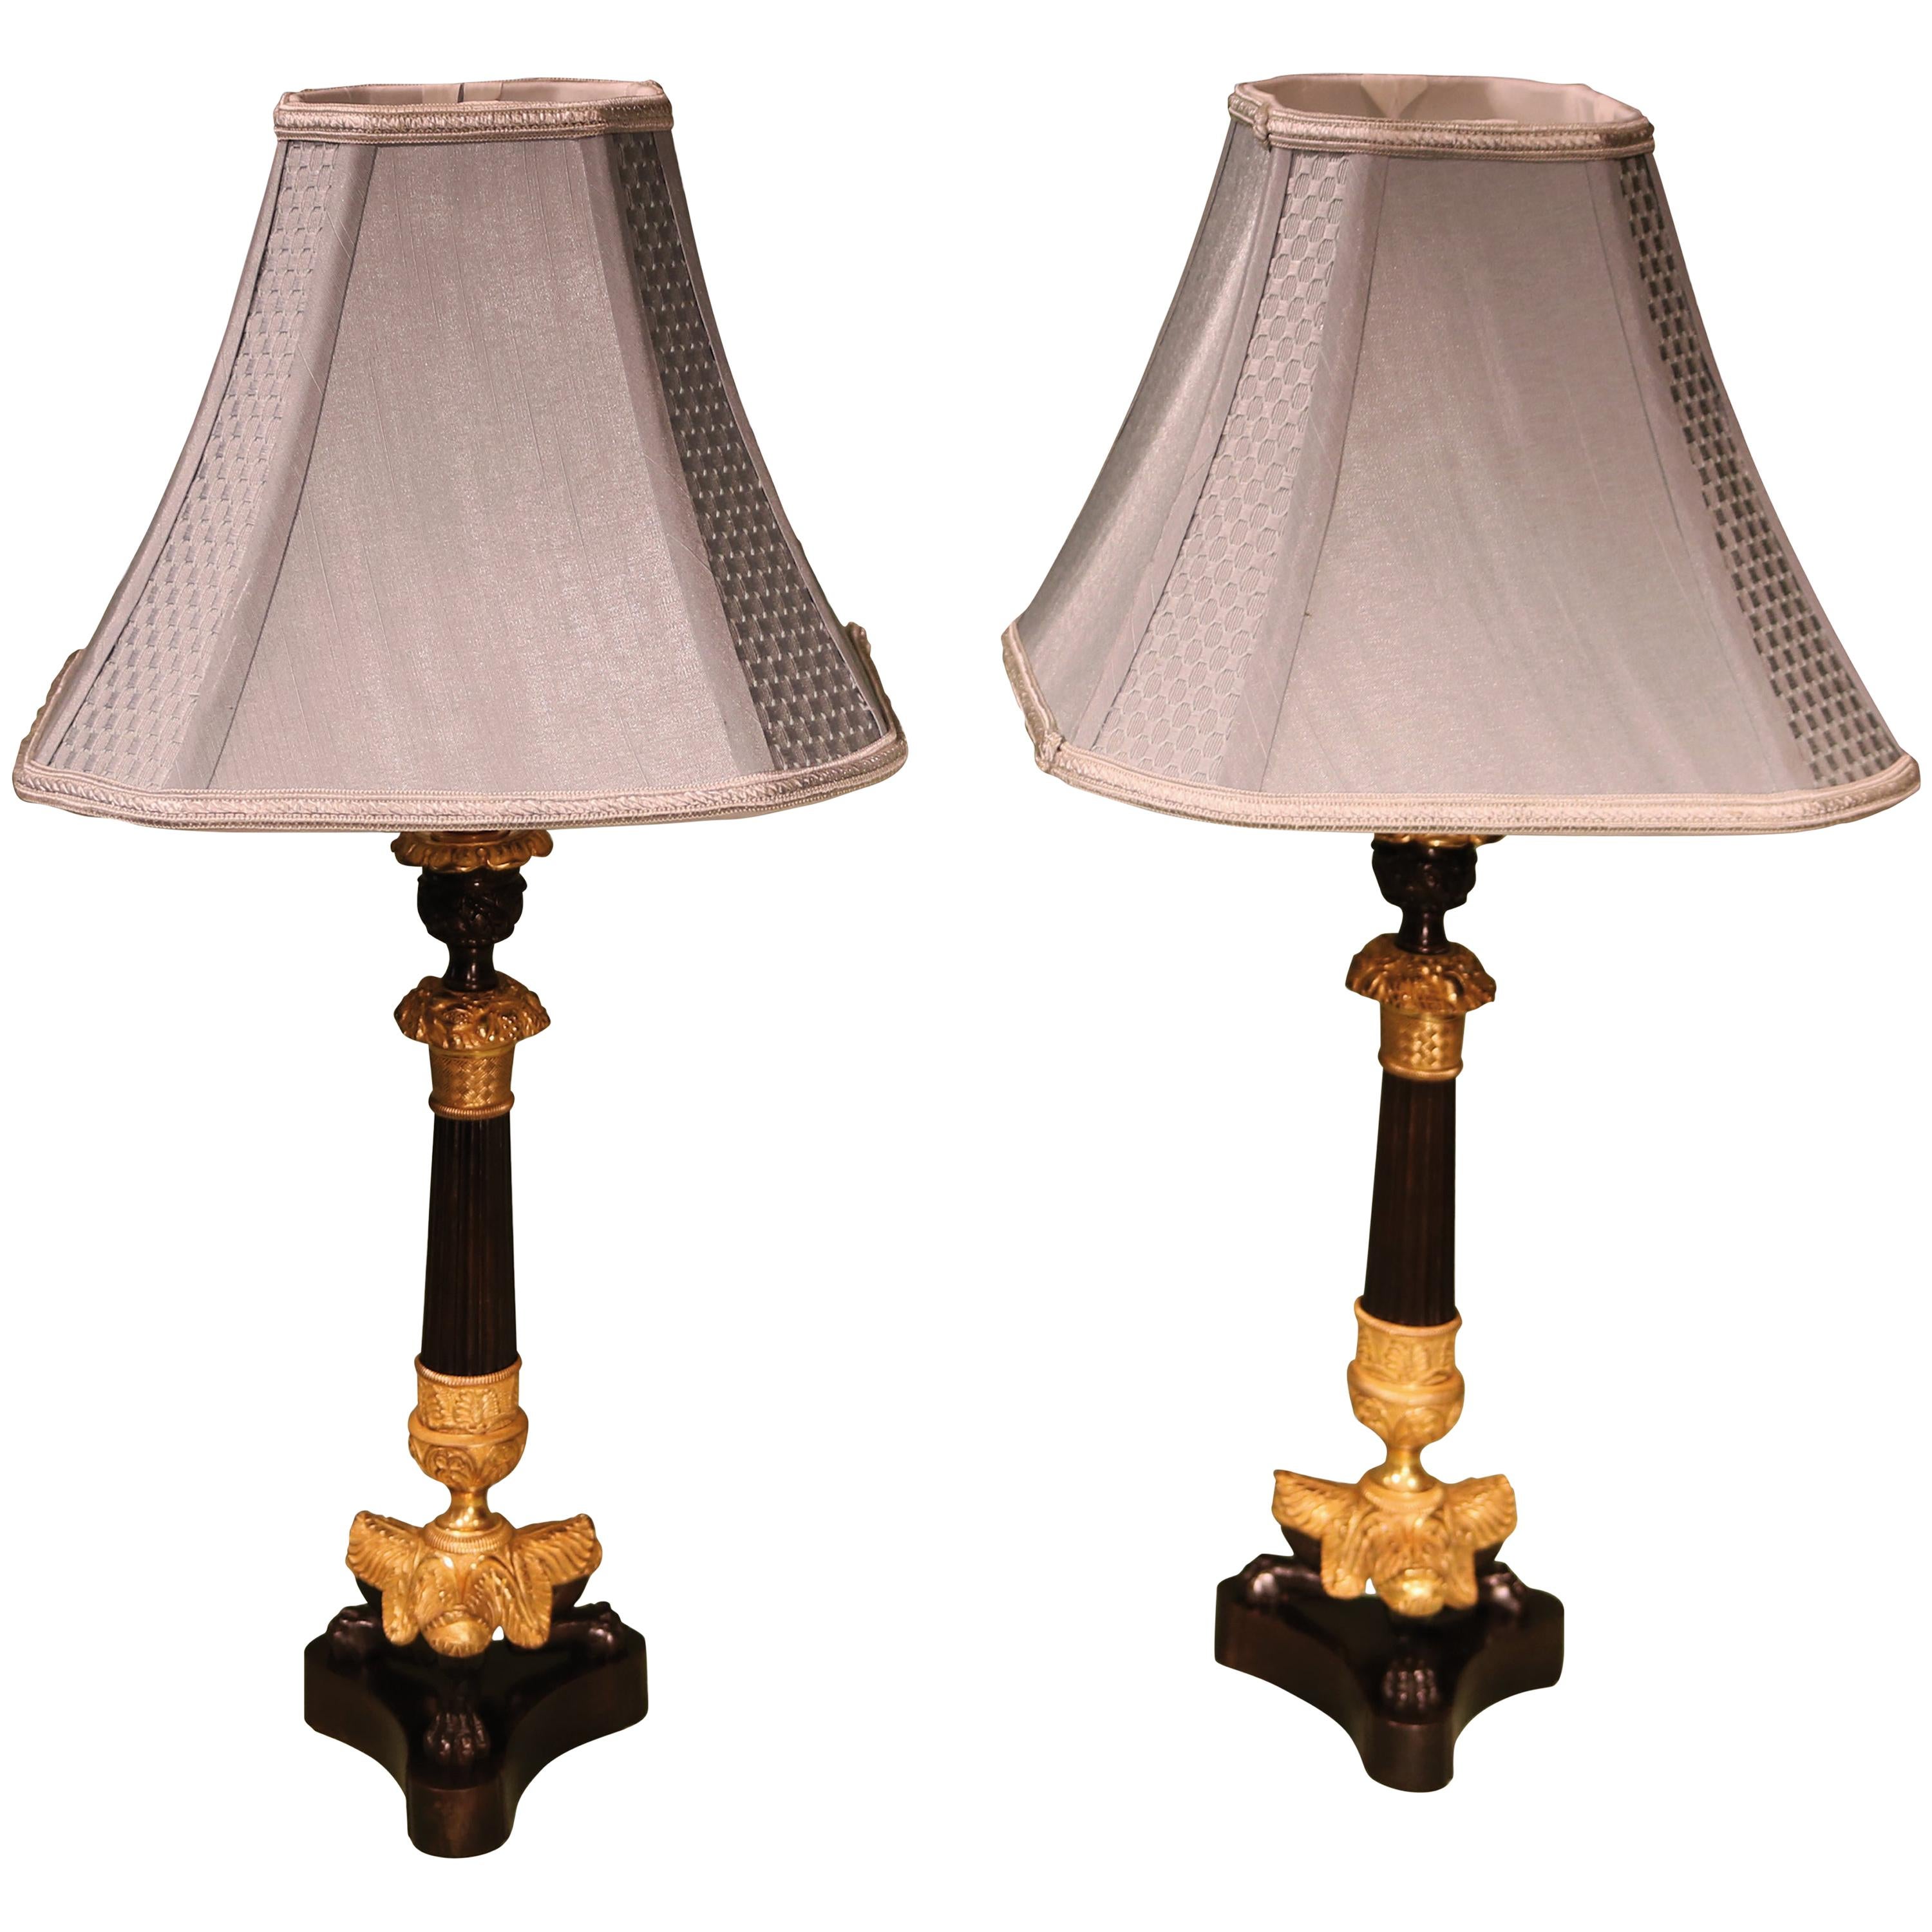 Pair of Regency Period Bronze and Ormolu Candlesticks Converted to Lamps For Sale